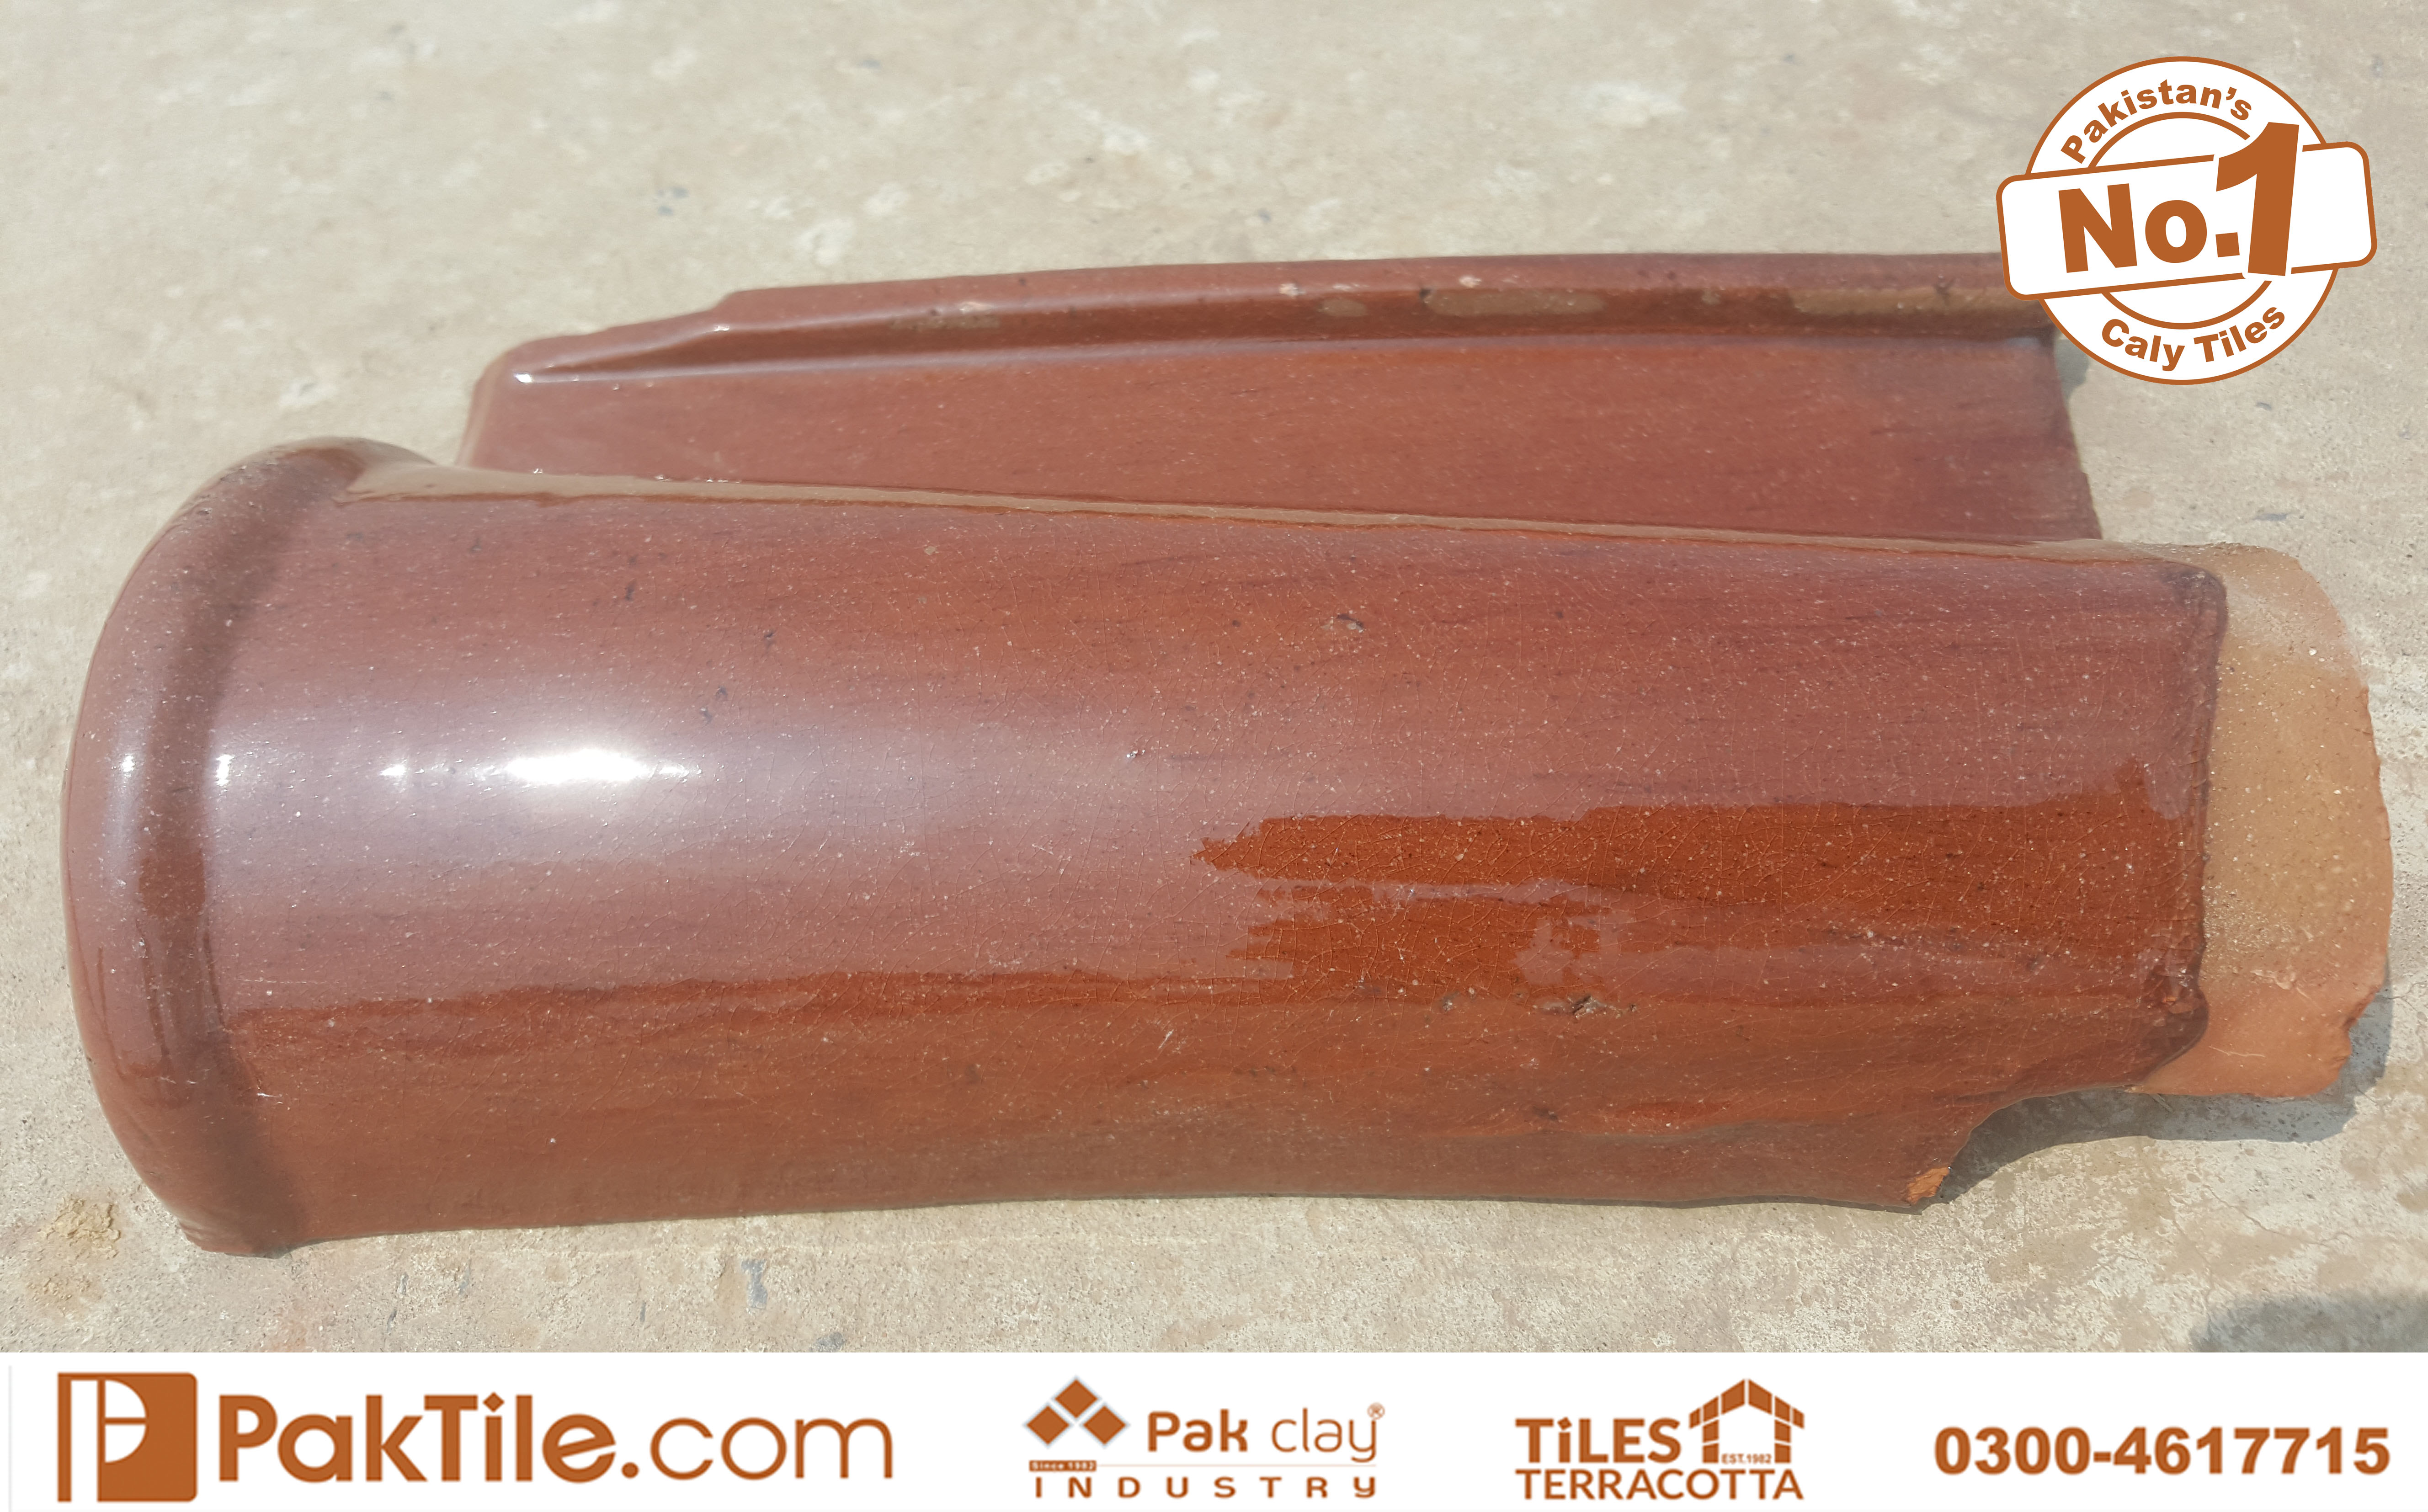 4 Pak clay cheap building material spanish glazed colors roof tiles designs shop low rates images